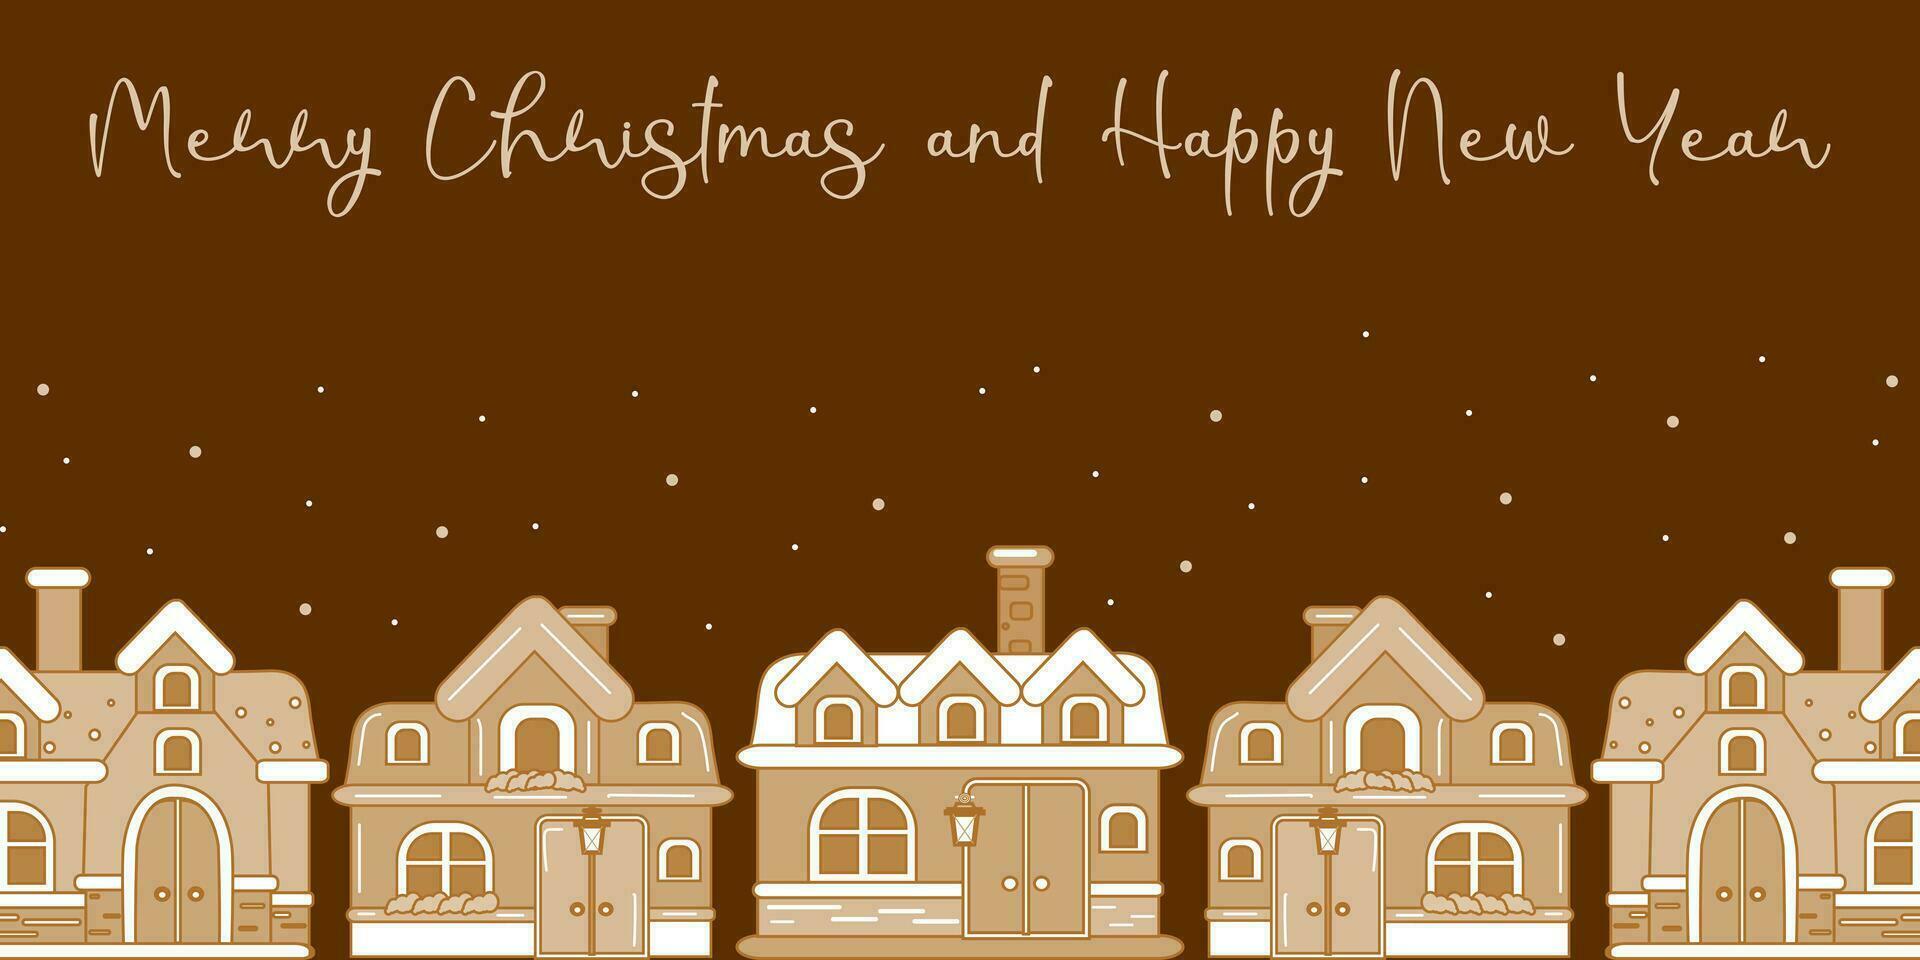 Gingerbread house a winter holiday card template. vector